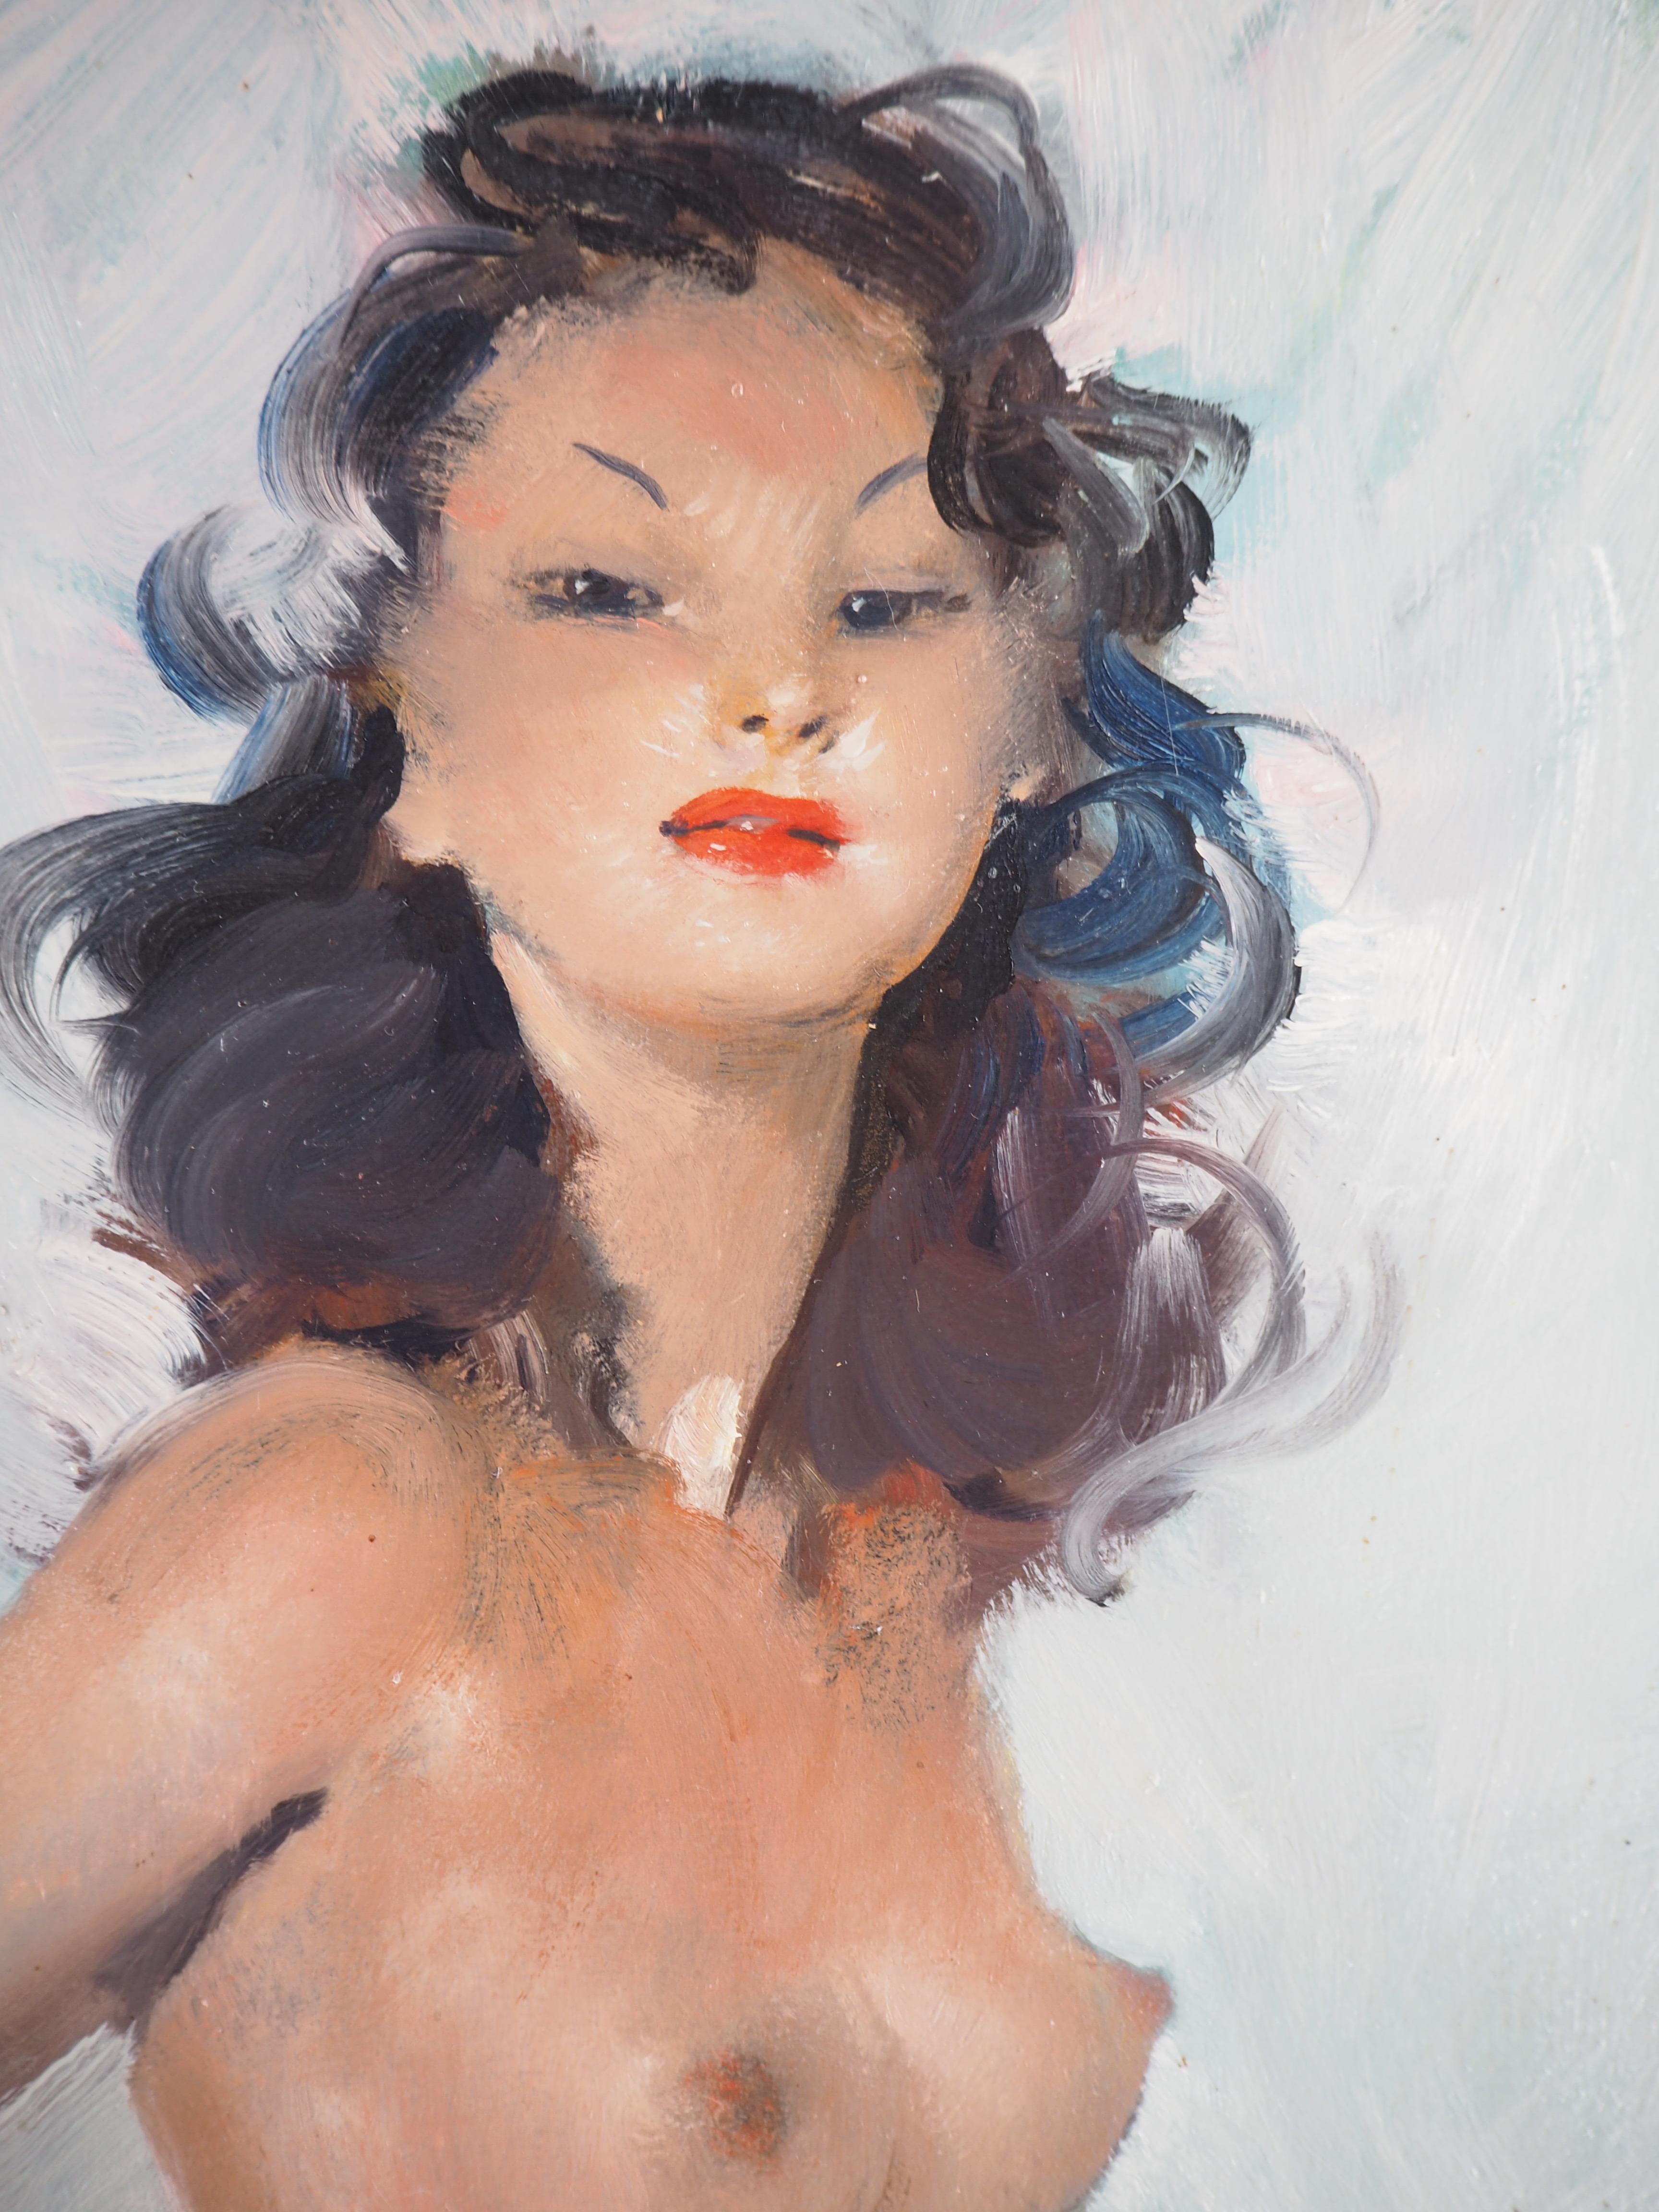 Jean-Gabriel DOMERGUE
Proud Dark Hair Woman (Fabienne), c. 1950

Original oil painting
Handsigned bottom right
On panel 33 x 24 cm (c. 13 x 10 in)
With frame 47 x 38 cm (c. 19 x 15 in)

Excellent condition, very light uses to the frame